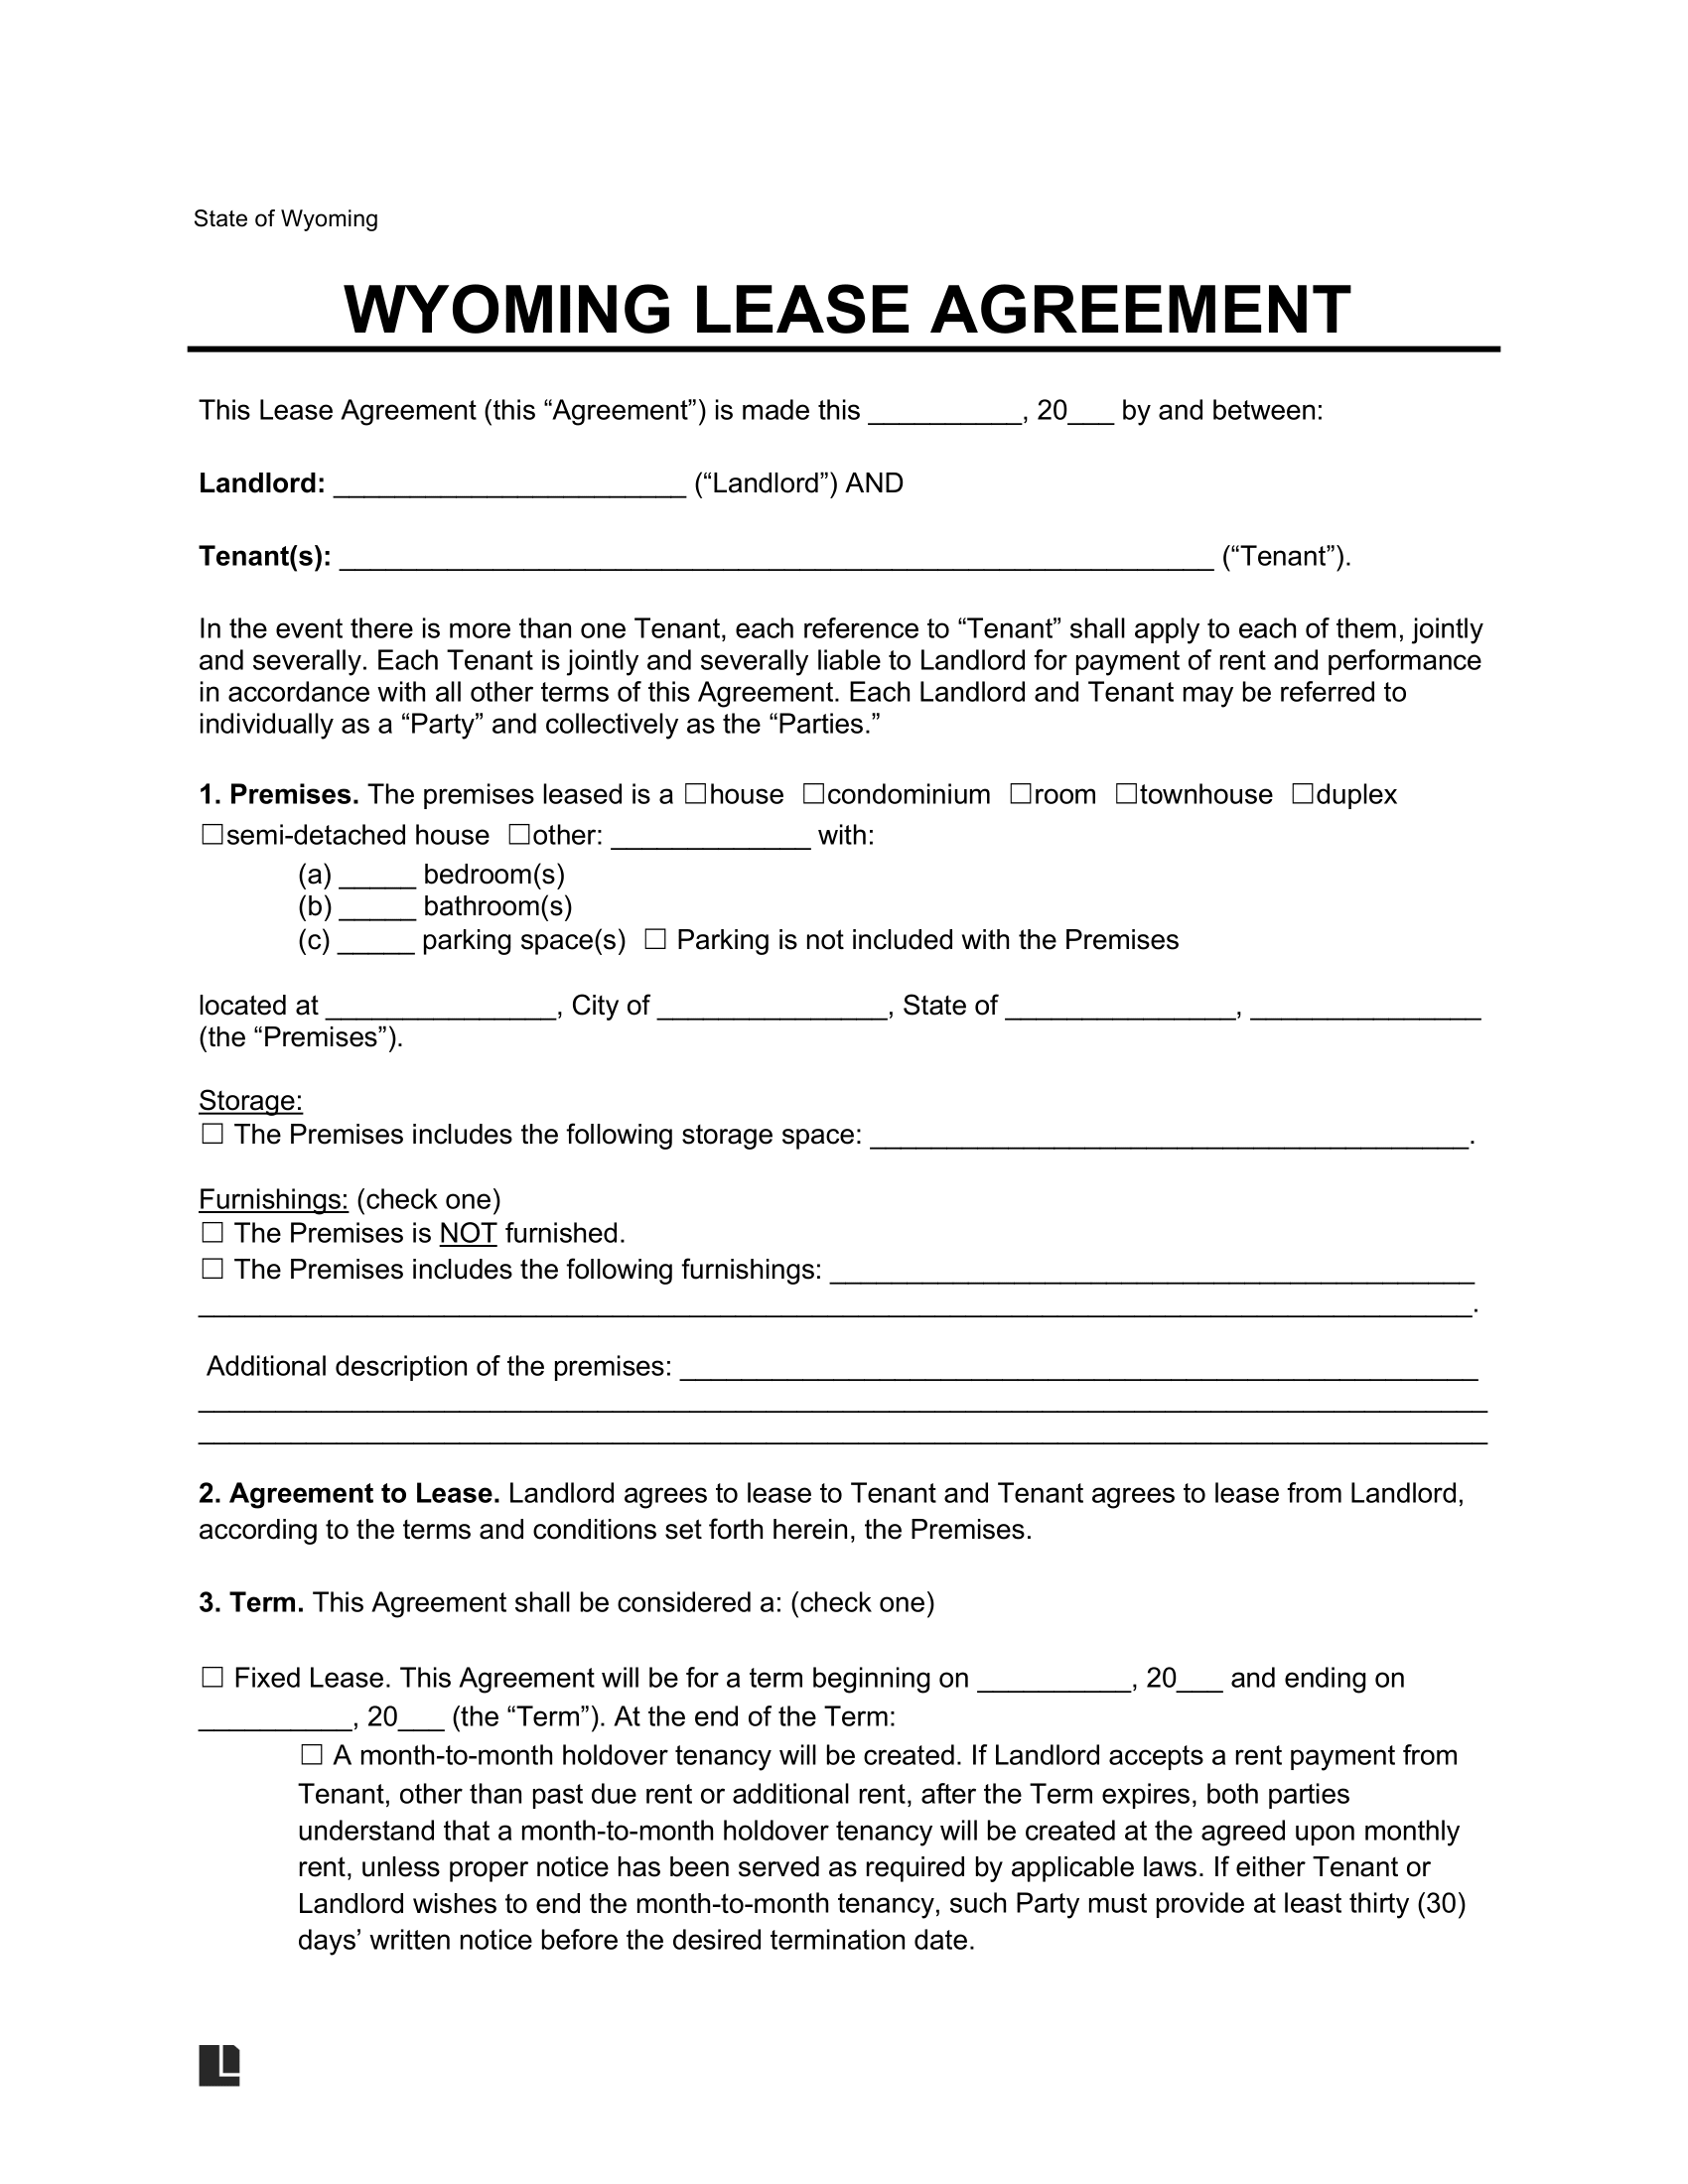 Wyoming Residential Lease Agreement Template